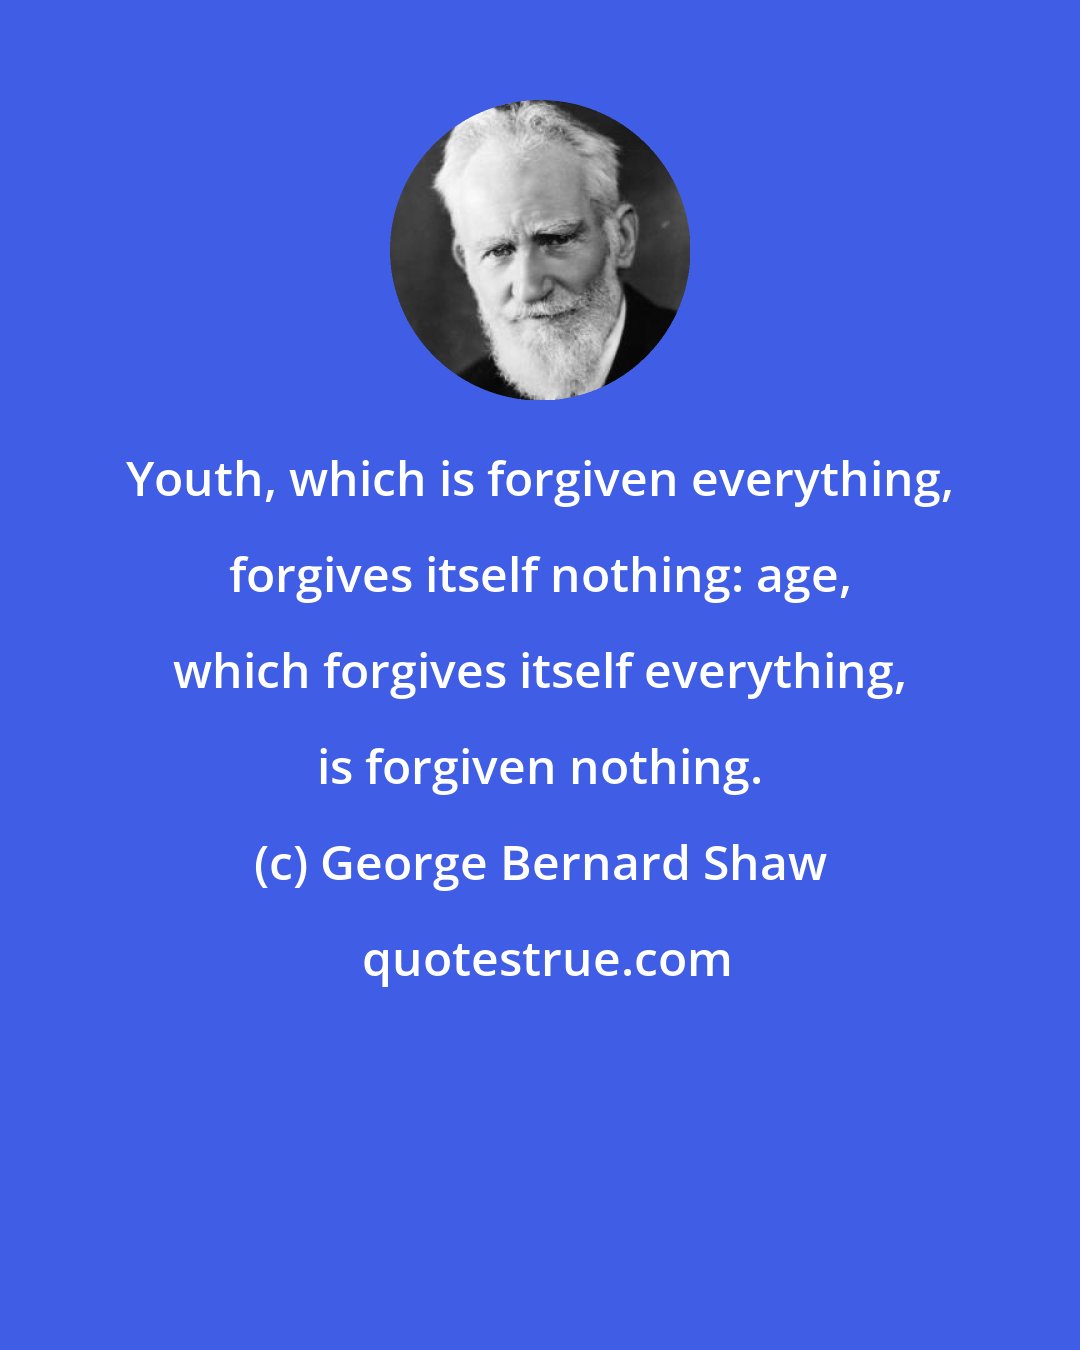 George Bernard Shaw: Youth, which is forgiven everything, forgives itself nothing: age, which forgives itself everything, is forgiven nothing.